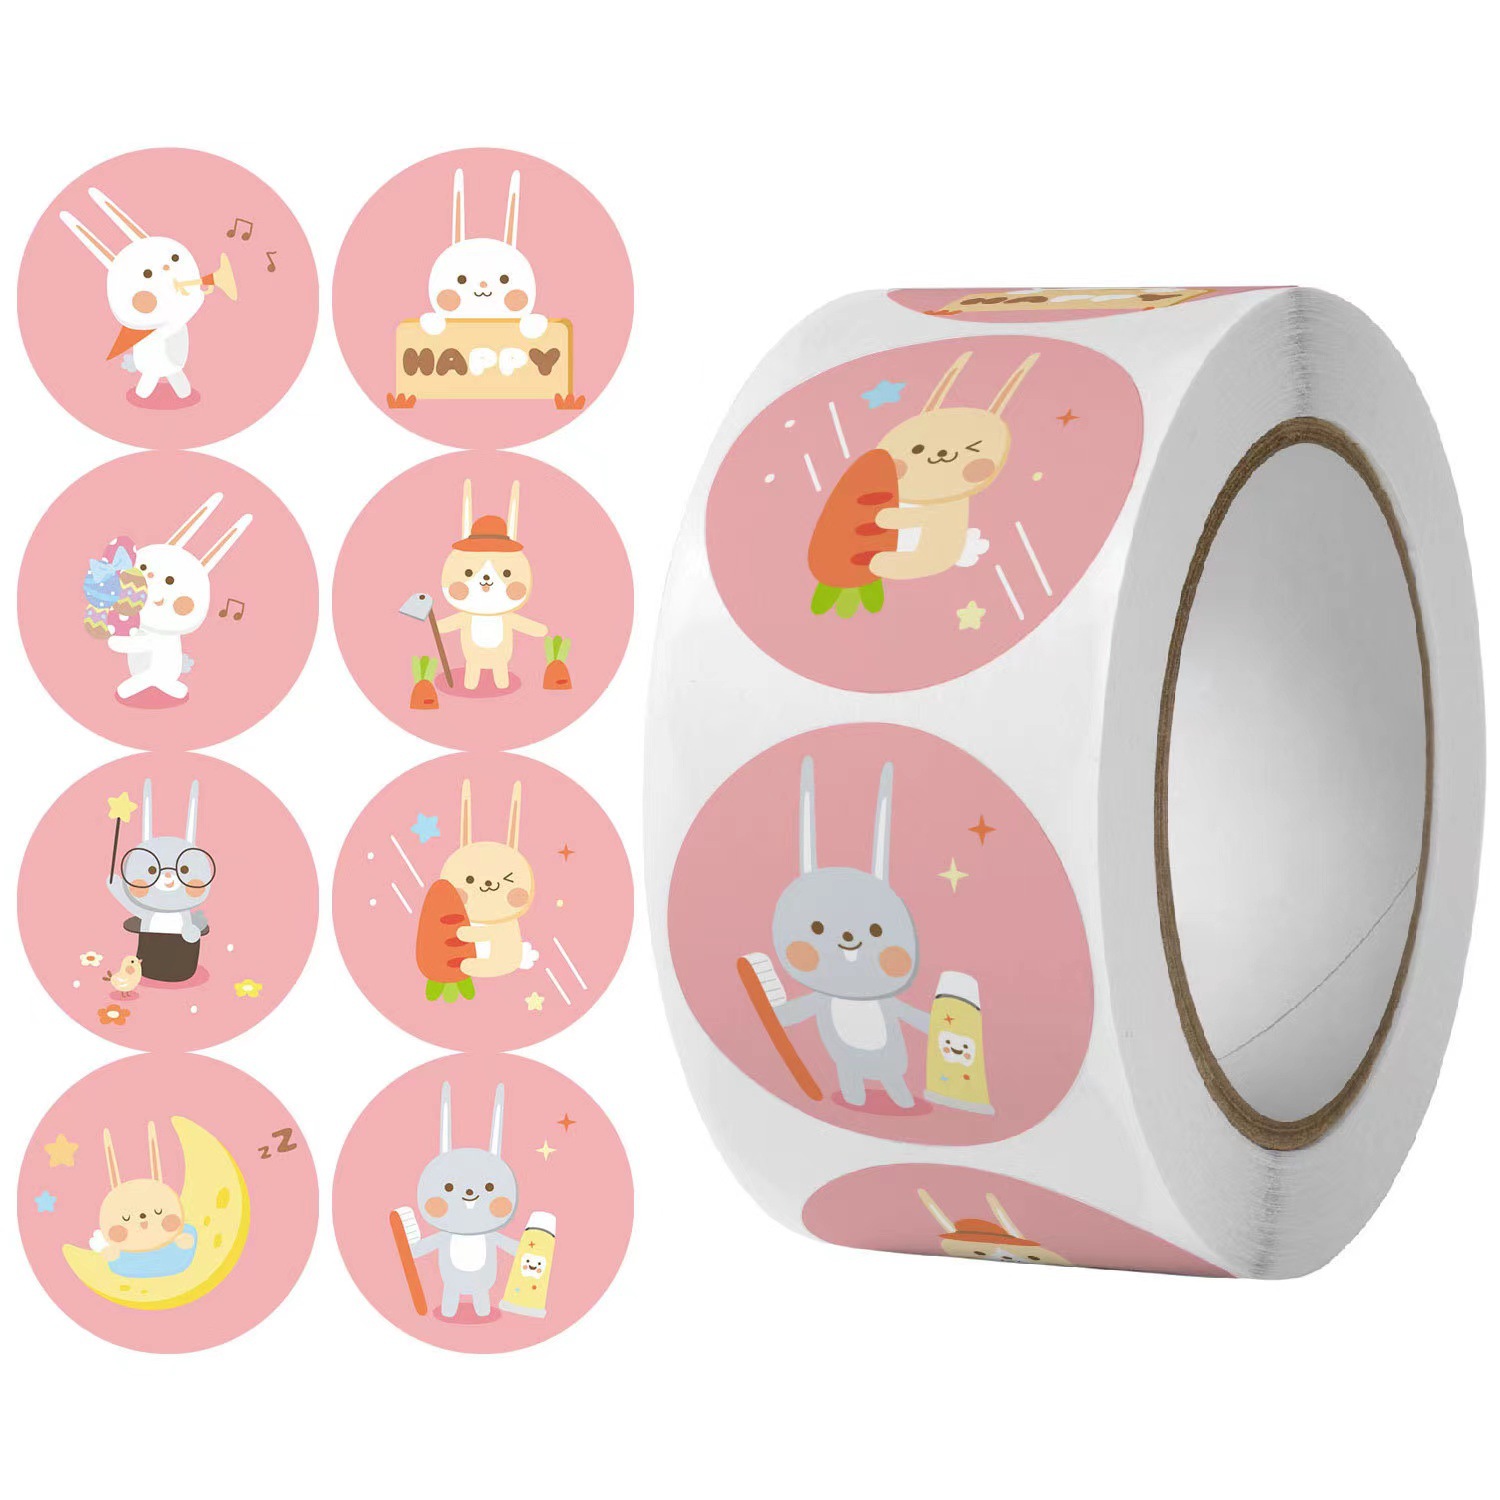 2022 wholesale price Curated Gift Boxes - 2022 Custom Waterproof Scratch Resistant Beautiful Reward Label Kids Gift Animal Cartoon Adhesive Label Stickers – Spring Package